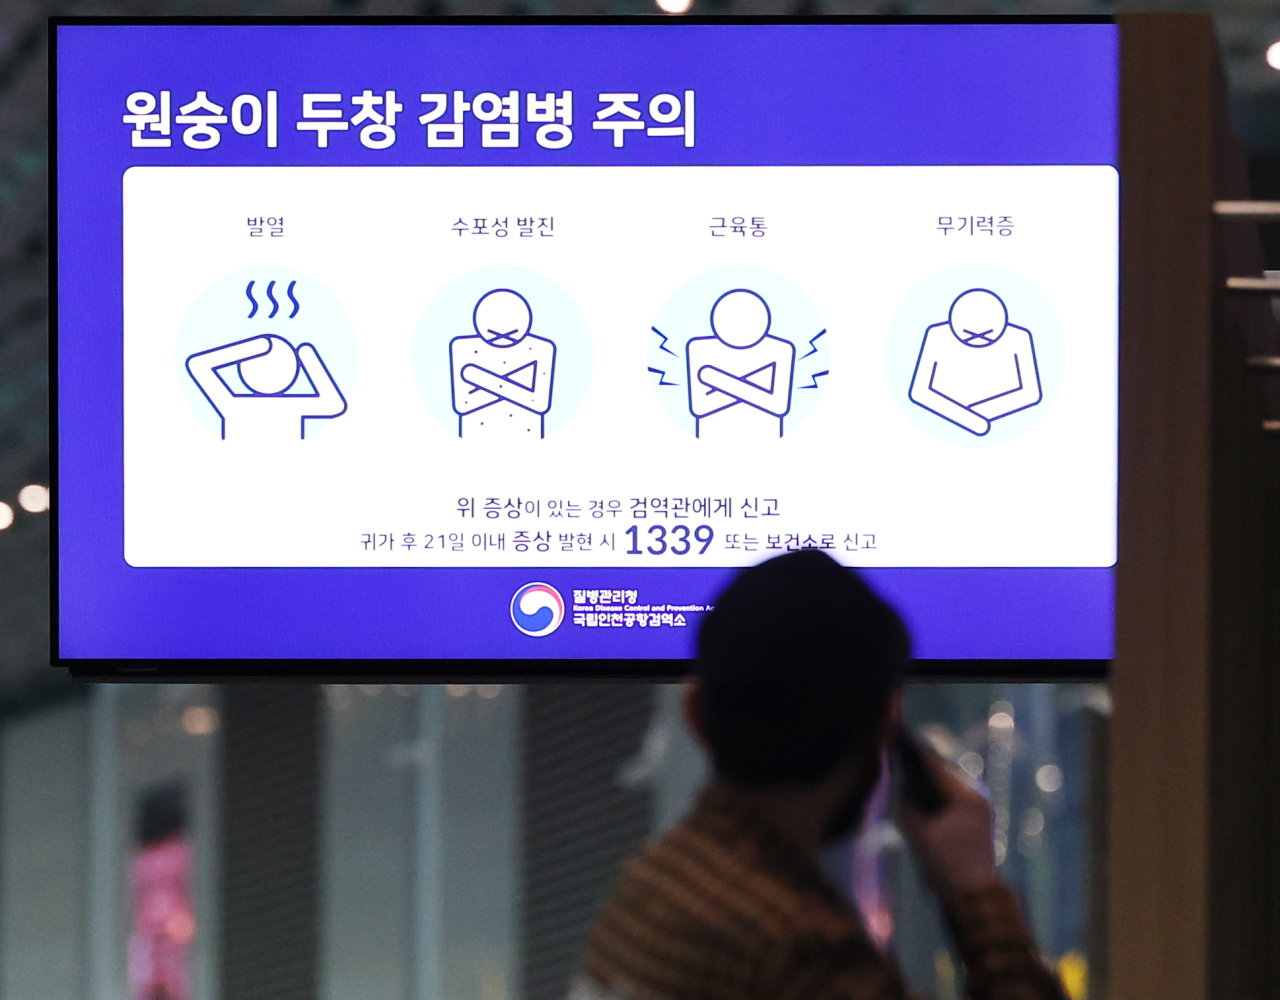 A sign shows symptoms of monkeypox at Incheon International Airport on Thursday. (Yonhap)